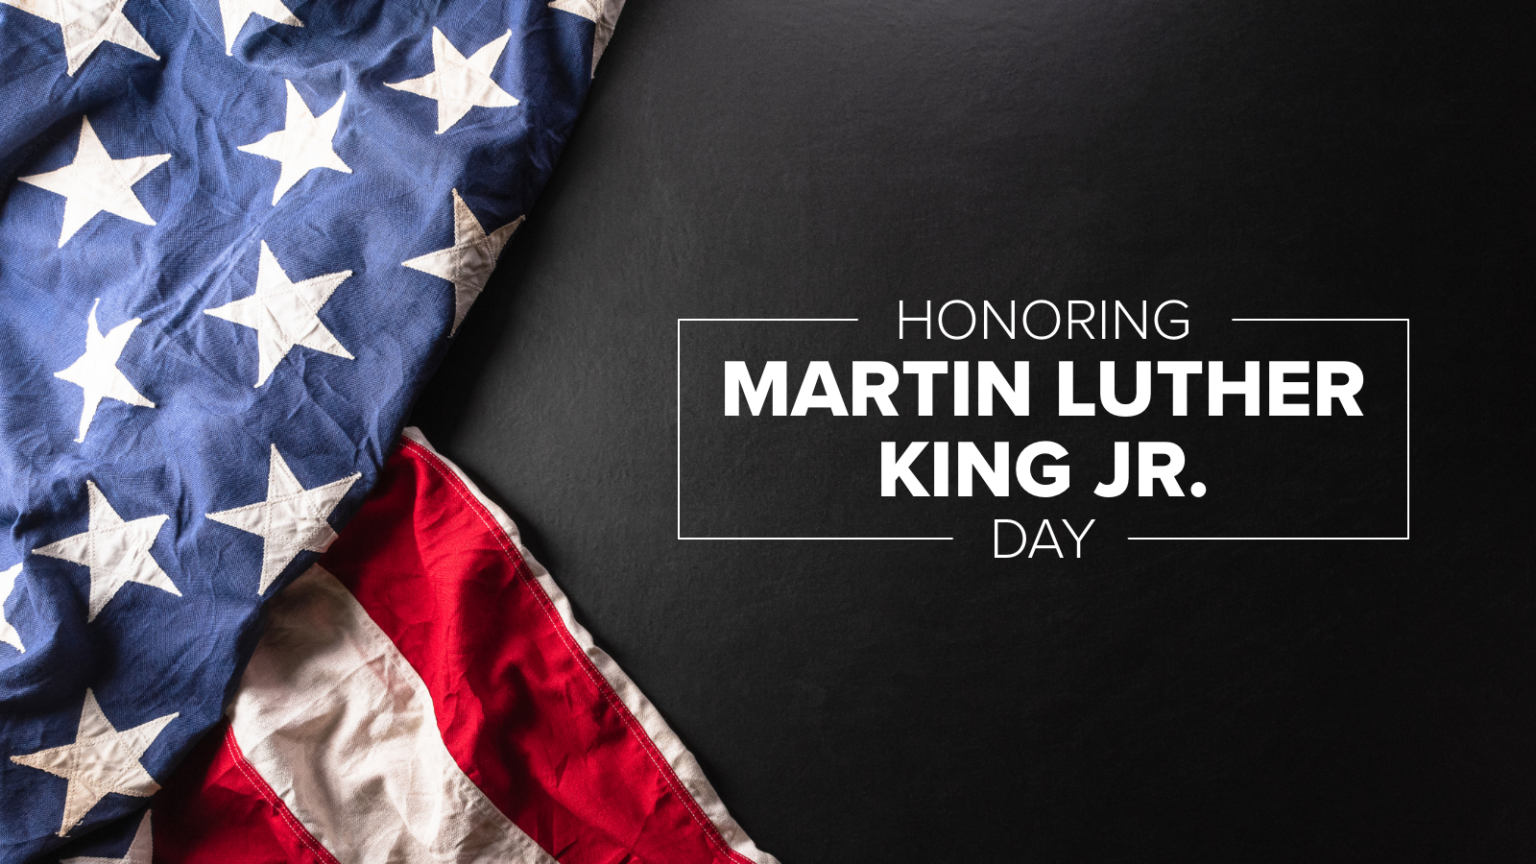 Honoring Martin Luther King Jr. through Acts of Service Insurance